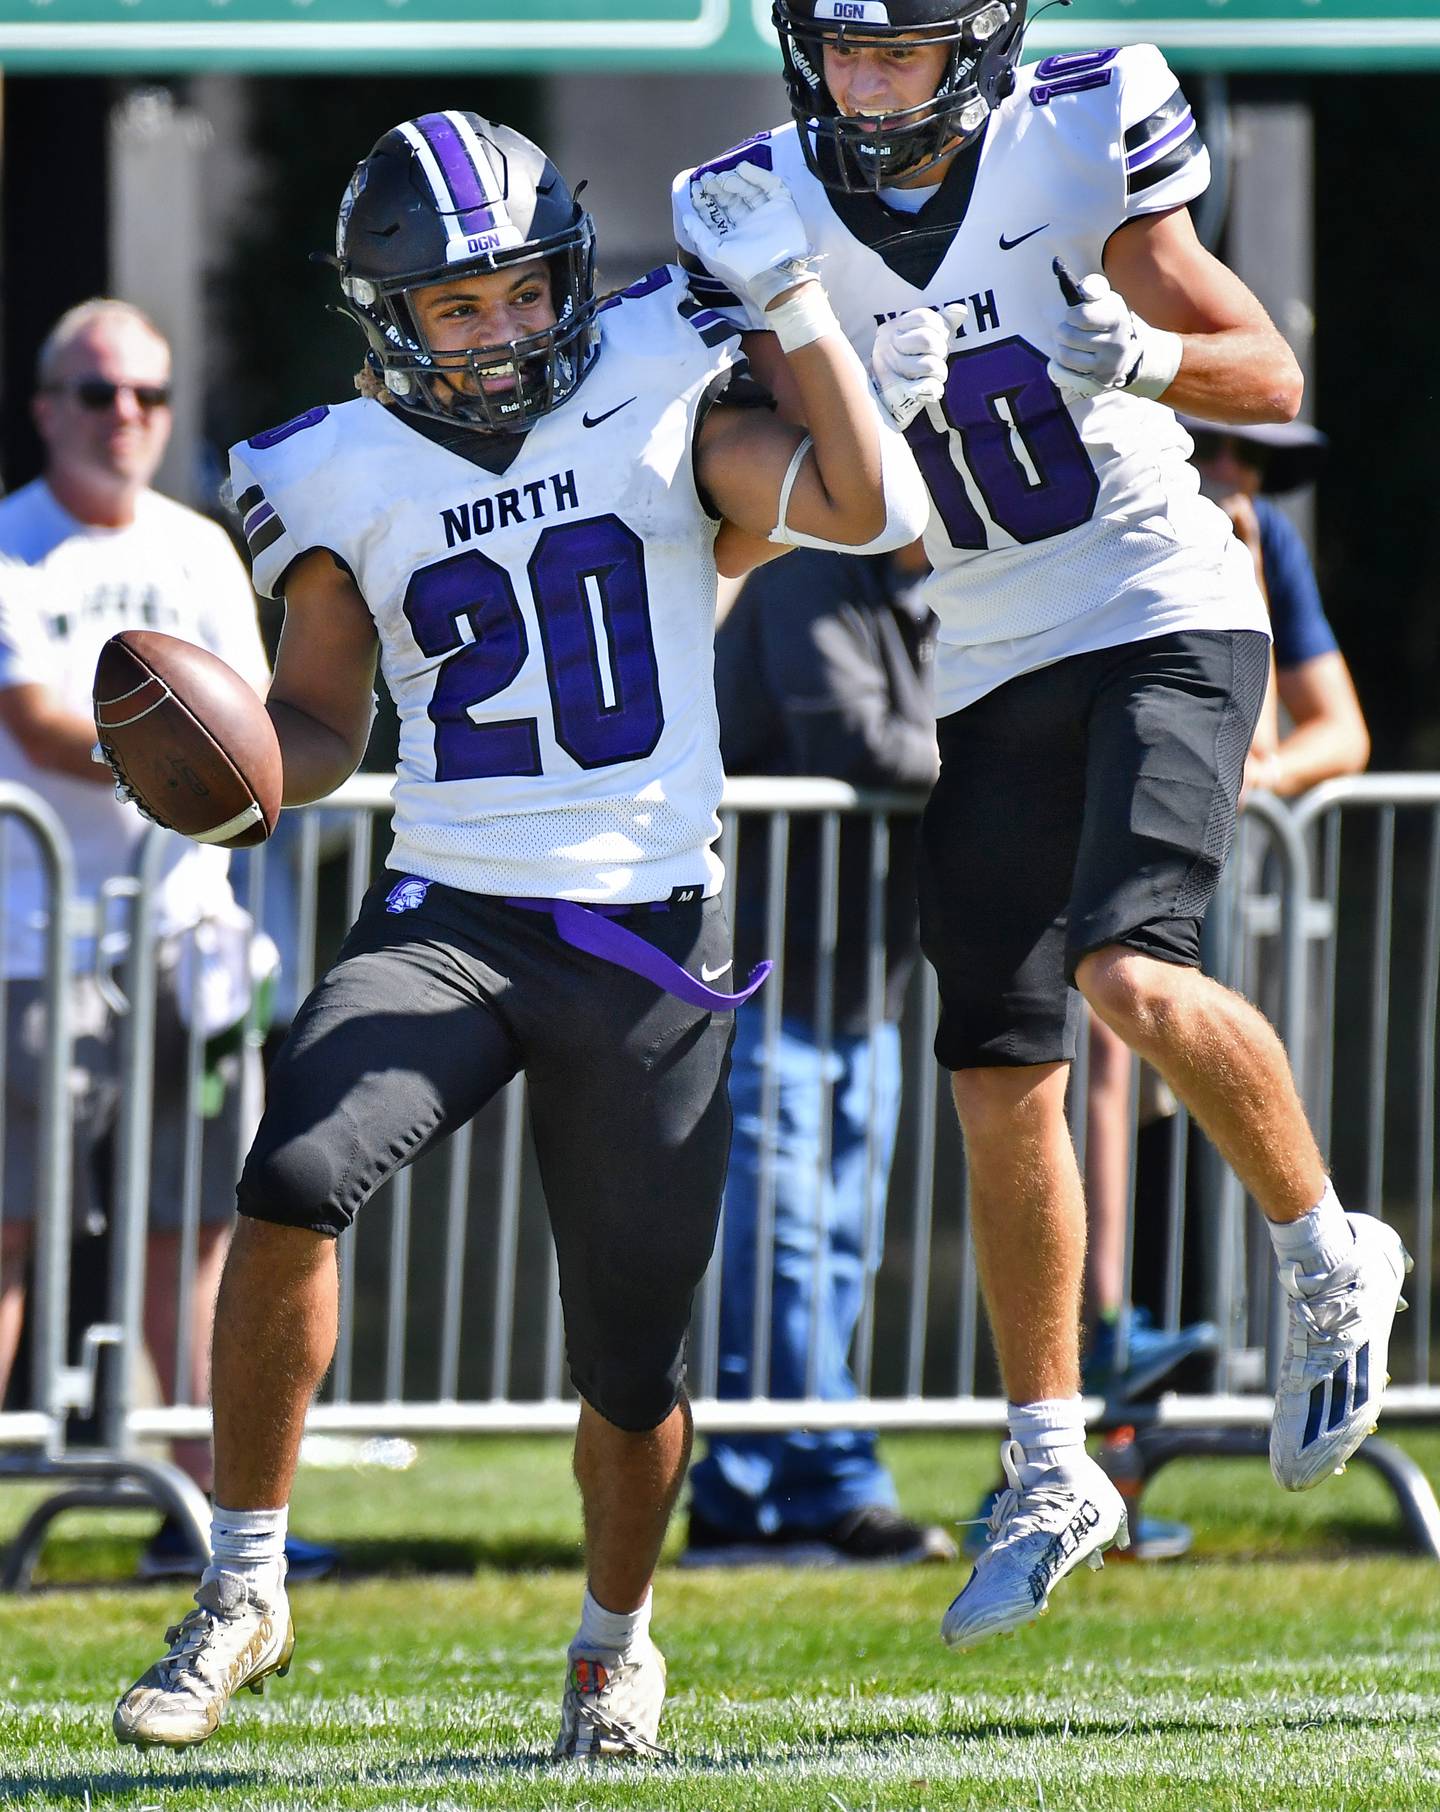 Downers Grove North's Noah Battle (20) celebrates his long touchdown run with teammate Oliver Thulin during a game against Glenbard West on Sep. 9, 2023 at Glenbard West High School in Glen Ellyn.
Jon Cunningham for Shaw Local News Network